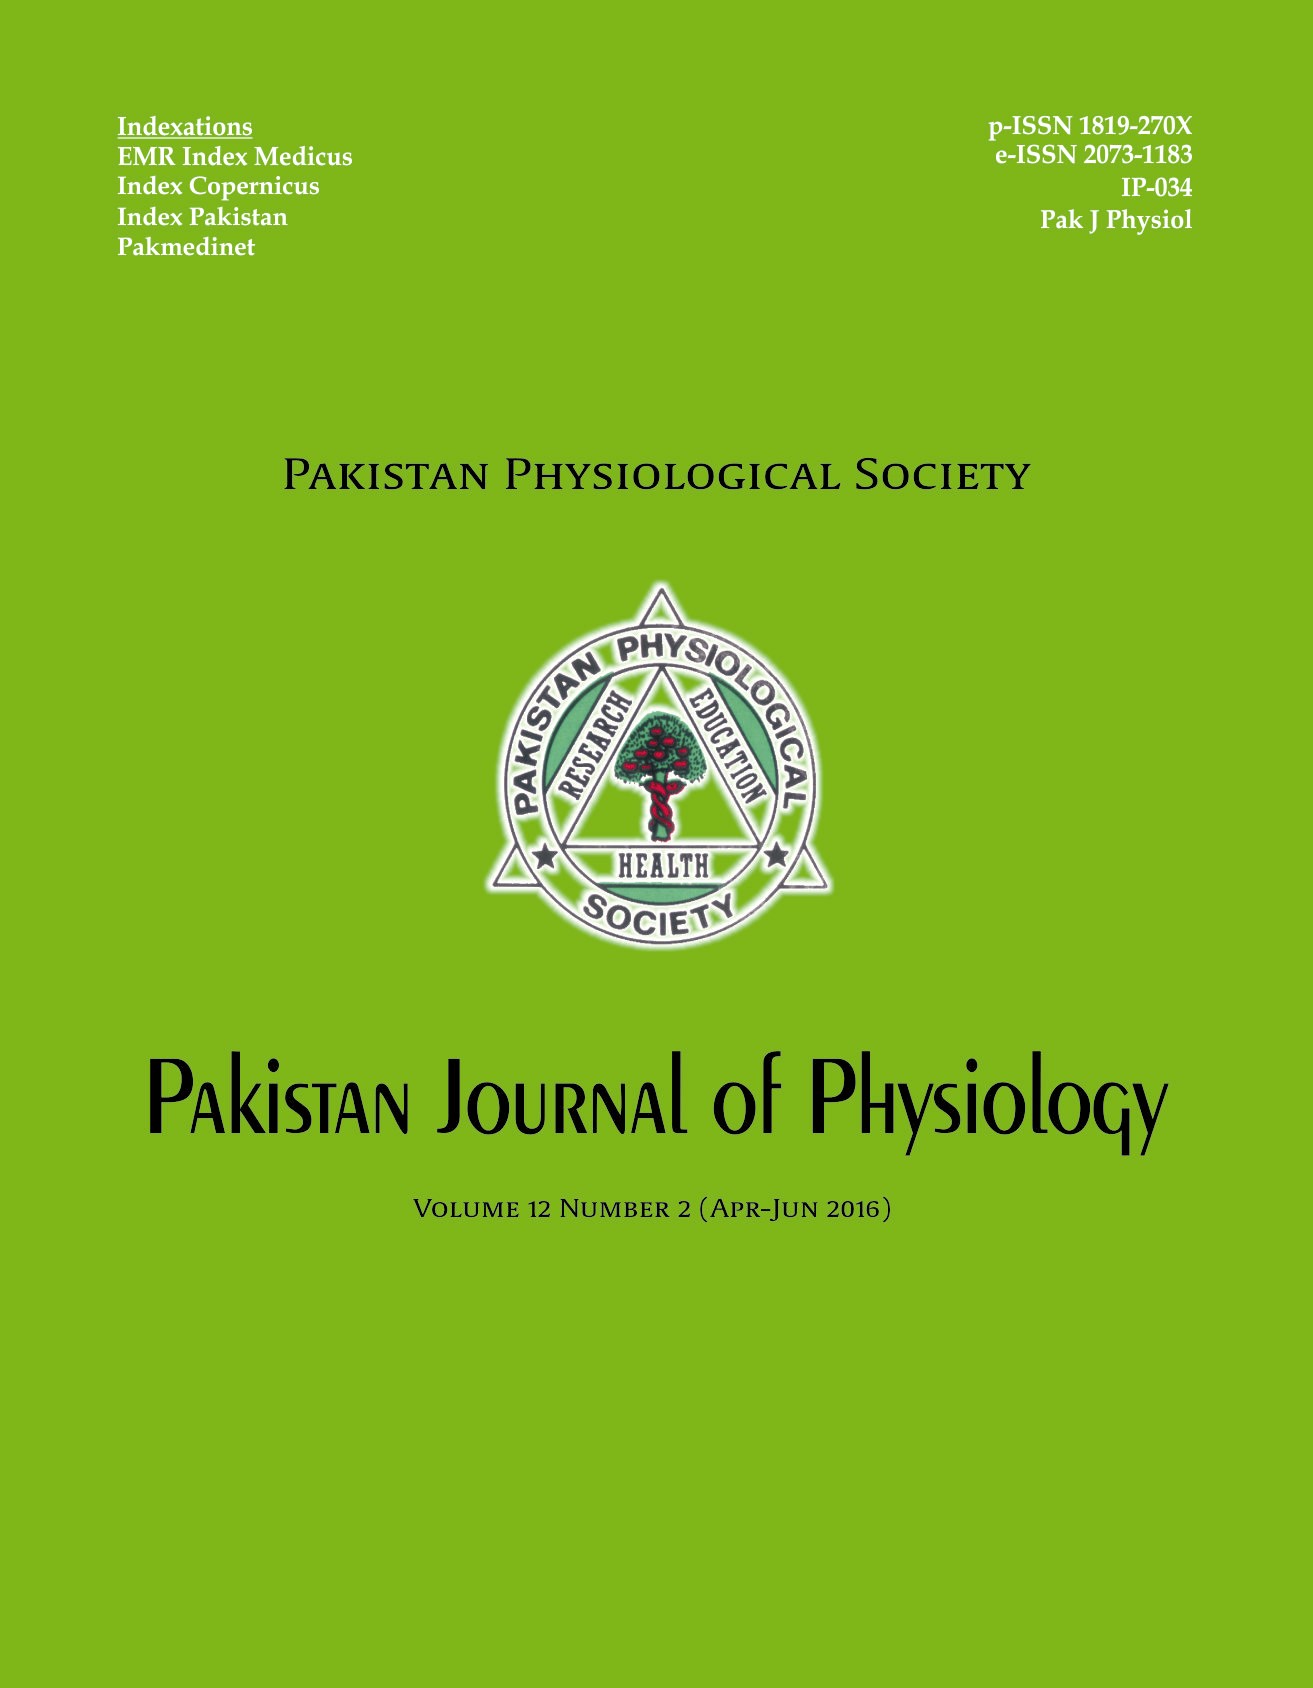 					View Vol. 12 No. 2 (2016): Pakistan Journal of Physiology
				